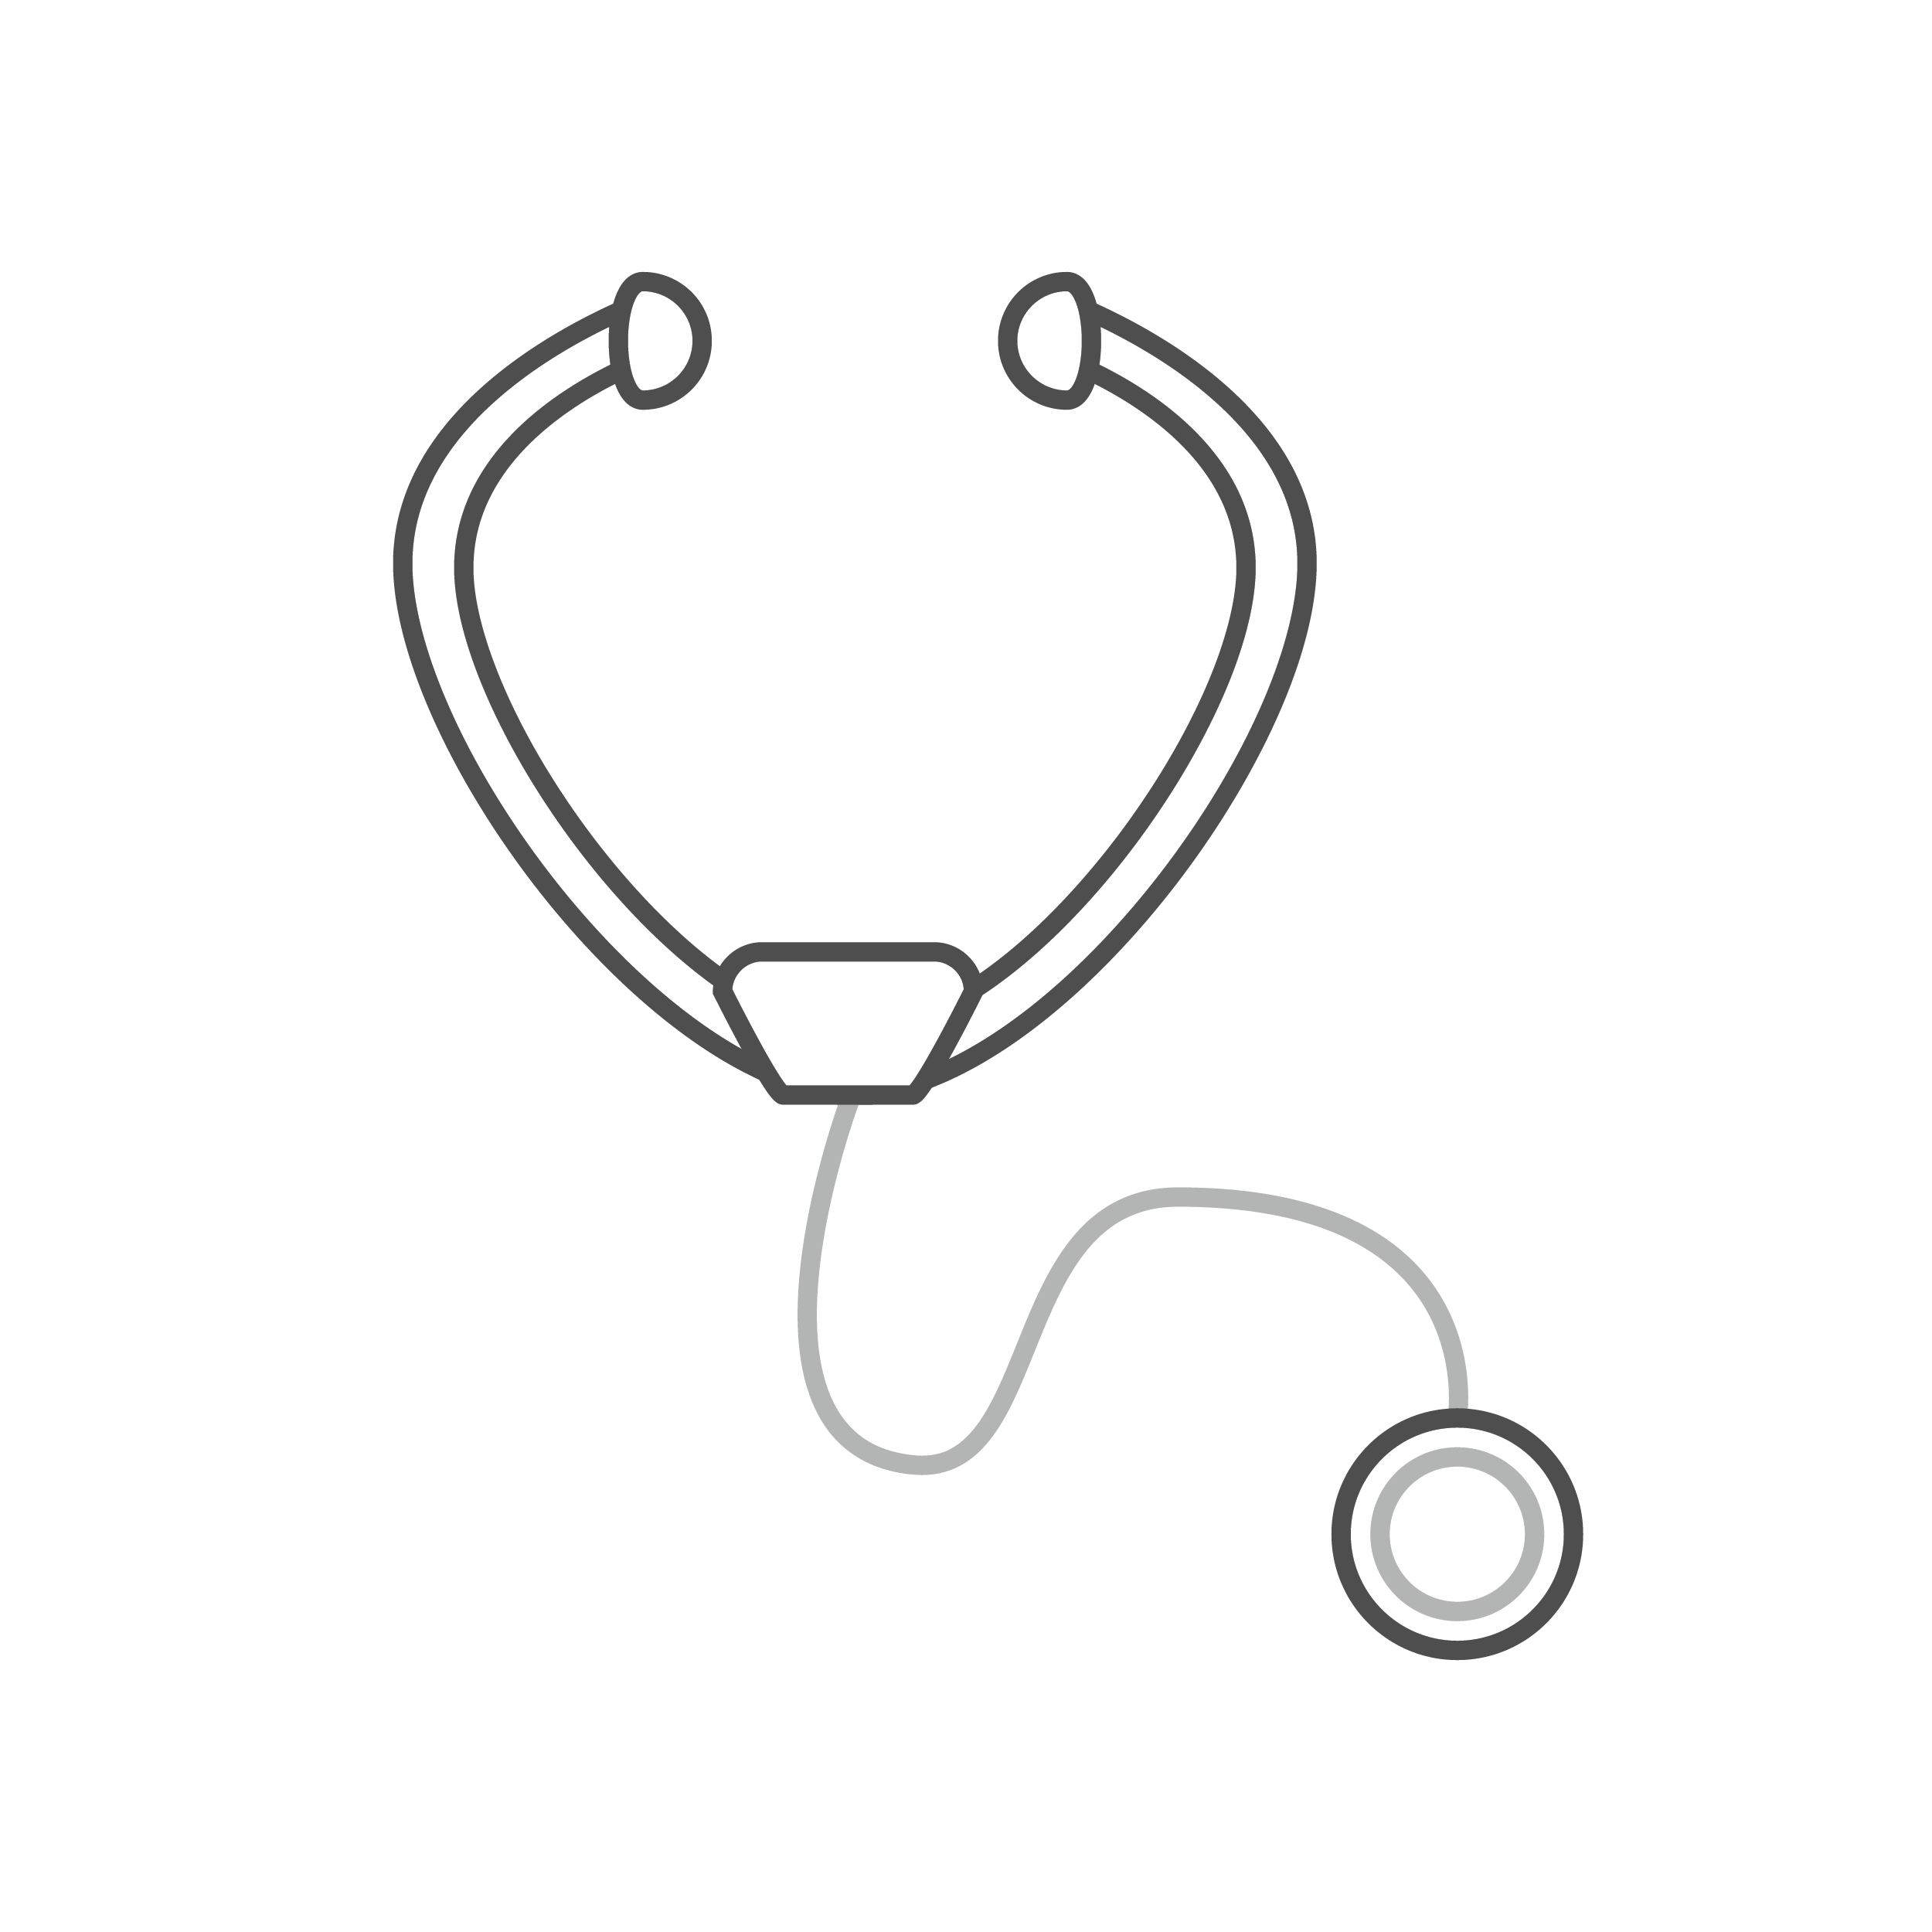 Icon of a stethoscope